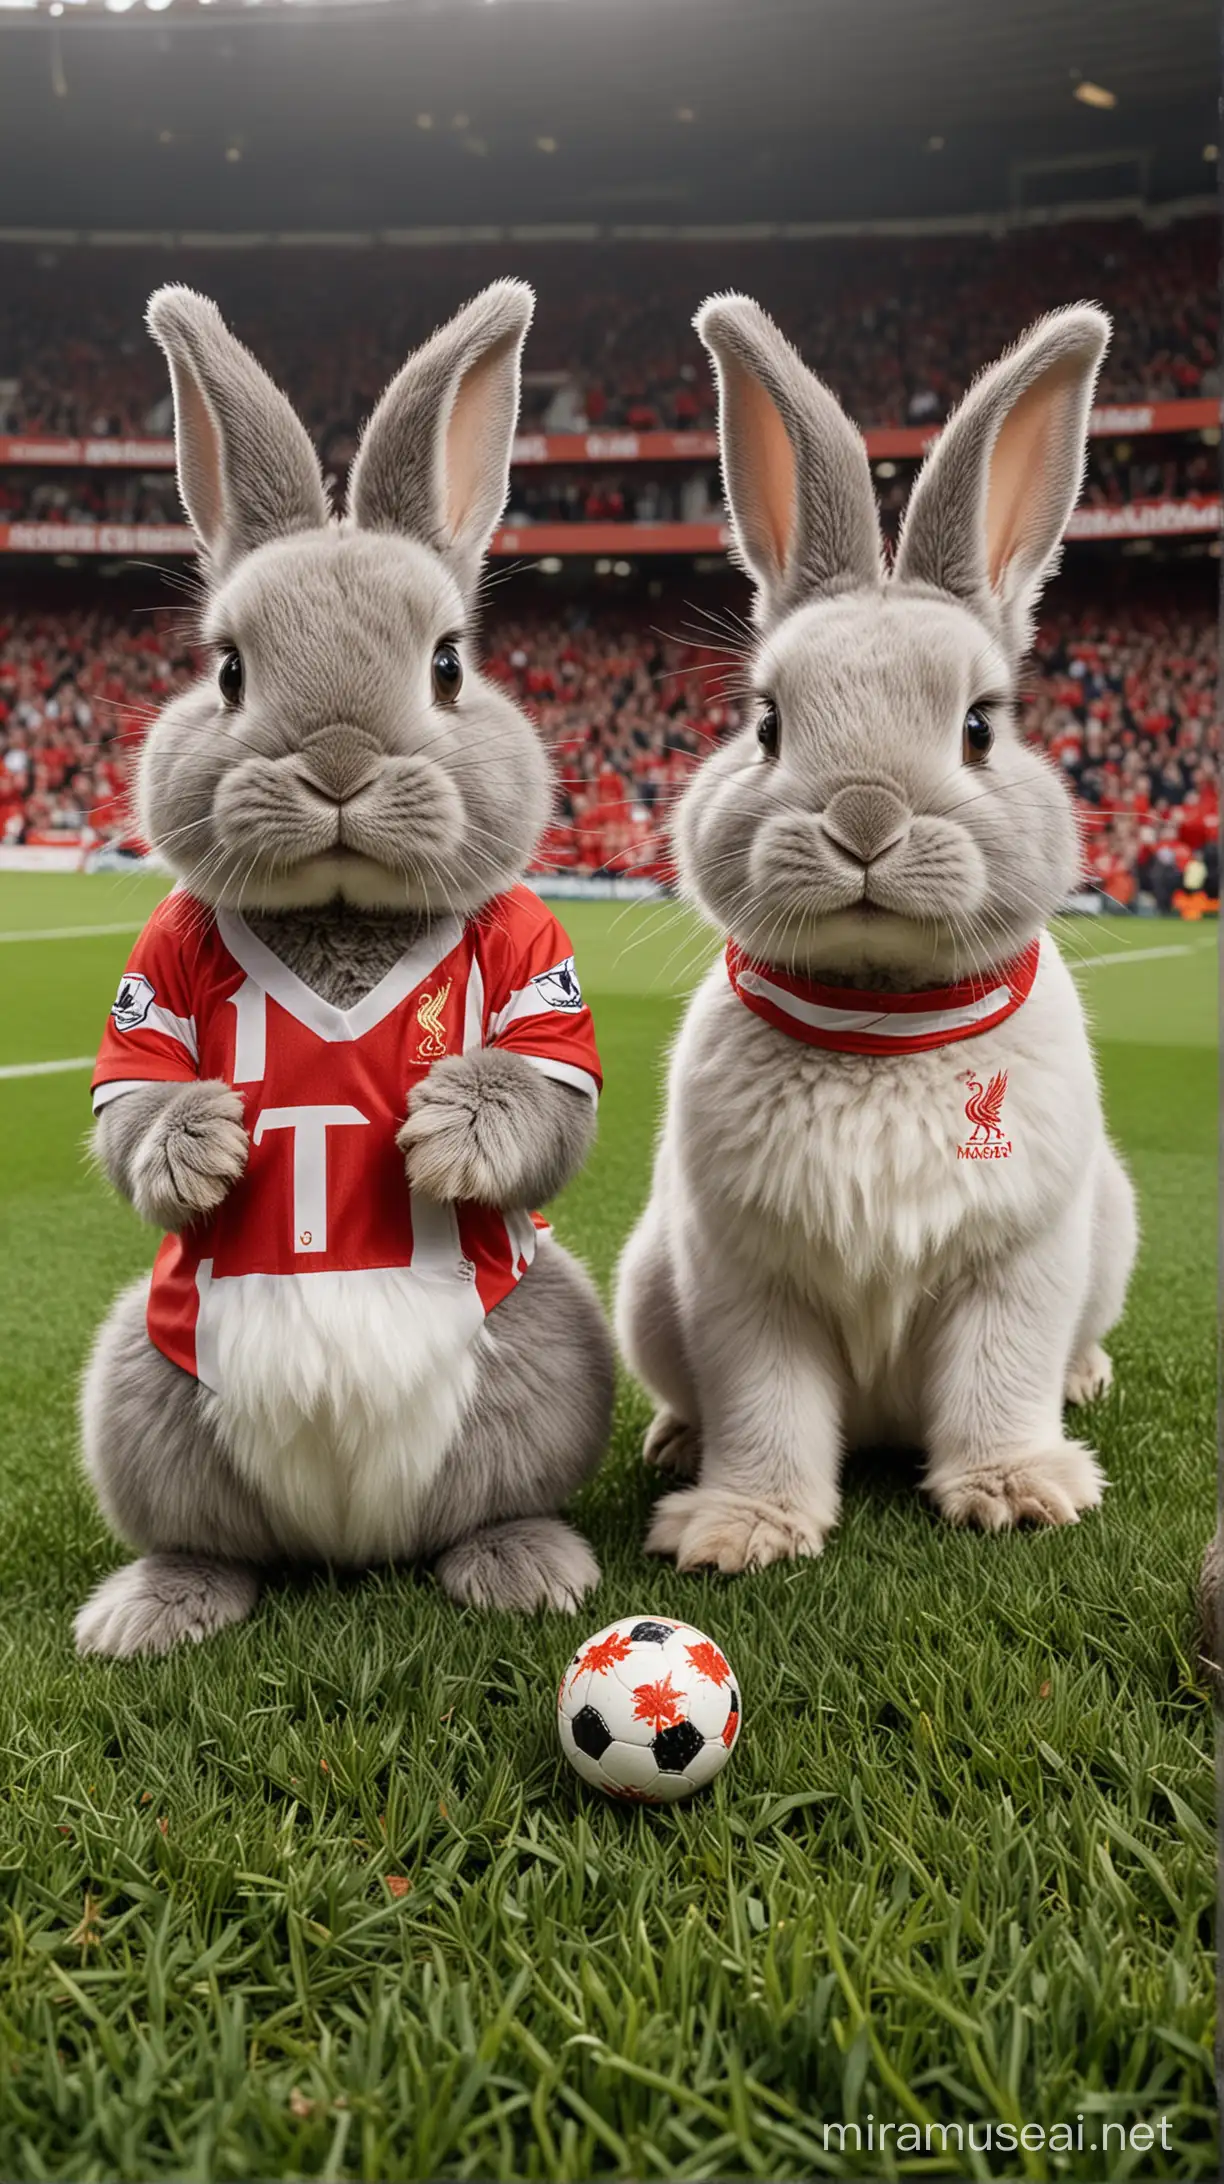 Iconic Anfield Stadium Black and Gray Rabbits Watching Liverpool vs Manchester City Soccer Game